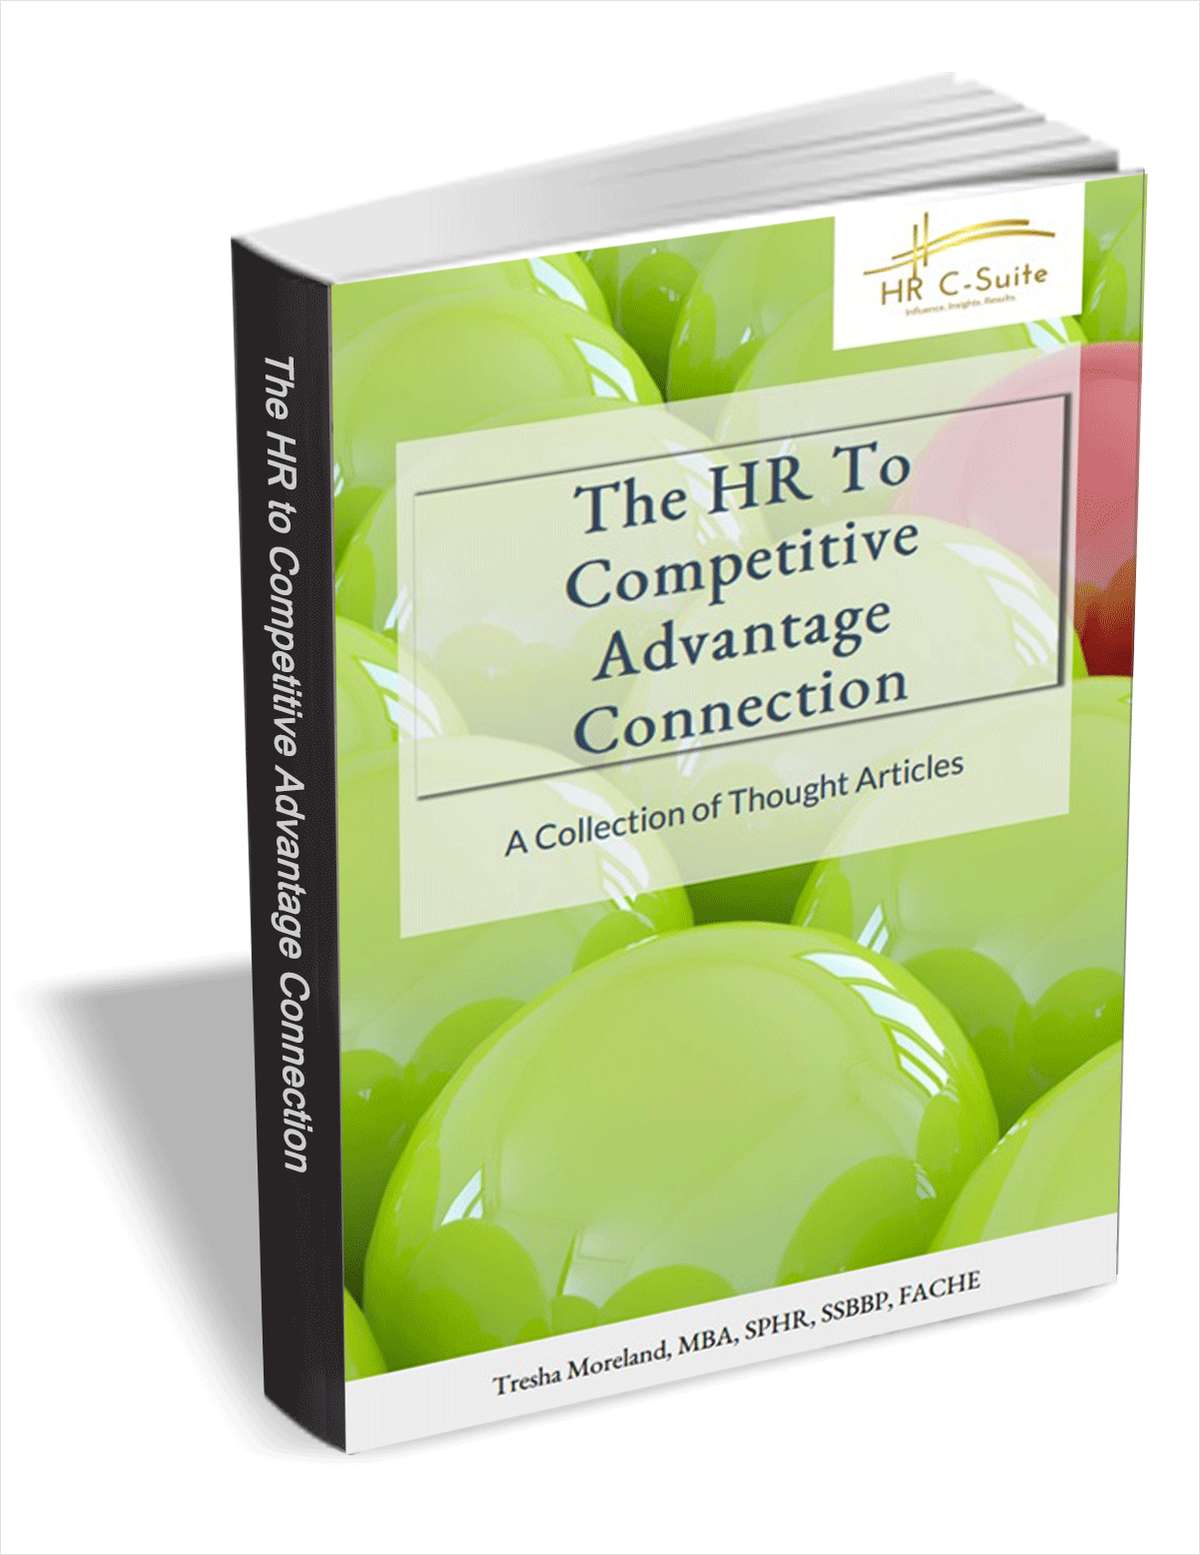 The HR To Competitive Advantage Connection